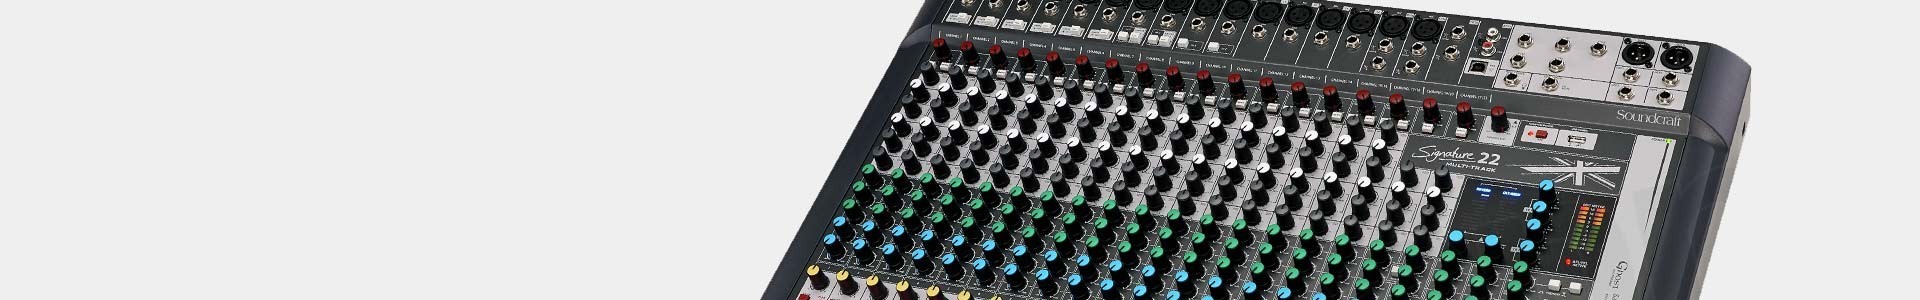 Analog and digital Audio Mixing Consoles - Avacab